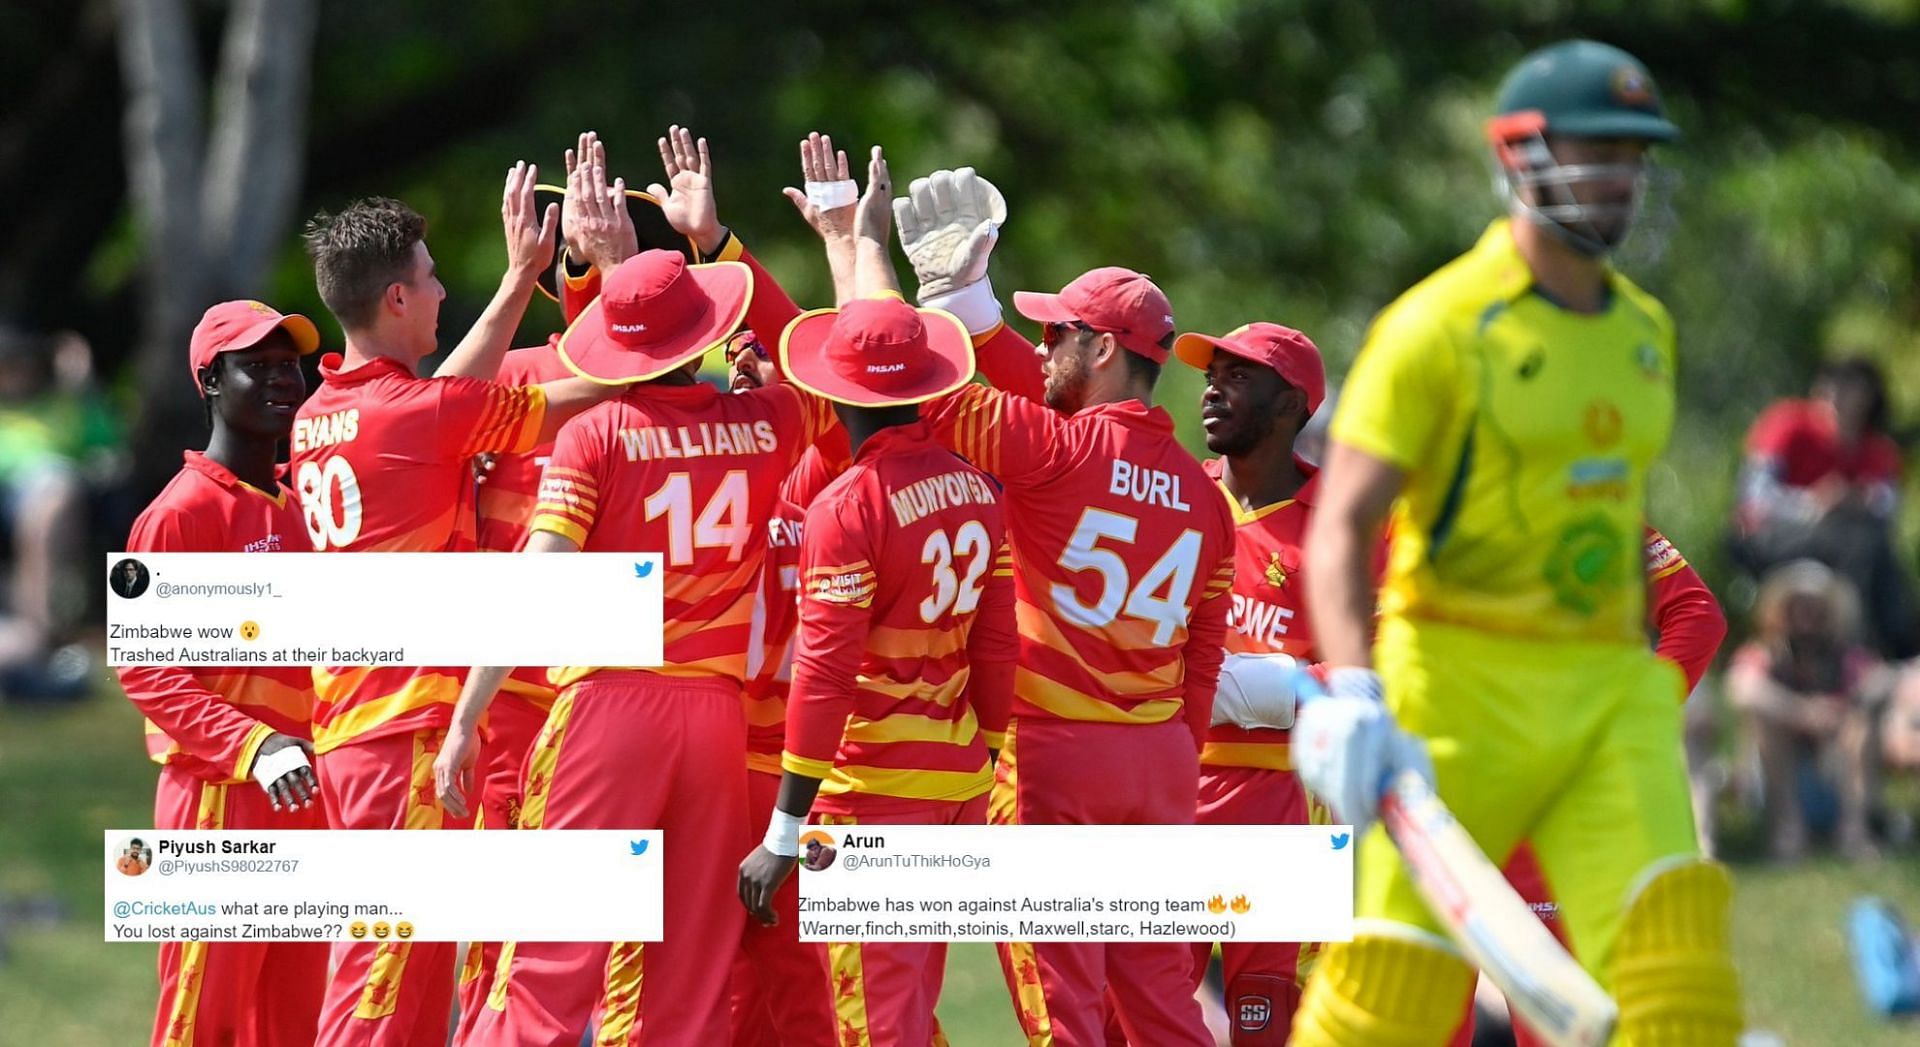 Ryan Burl took a fifer against Australia as the hosts were all out for 141. [Pic credits: Zimbabwe Cricket]